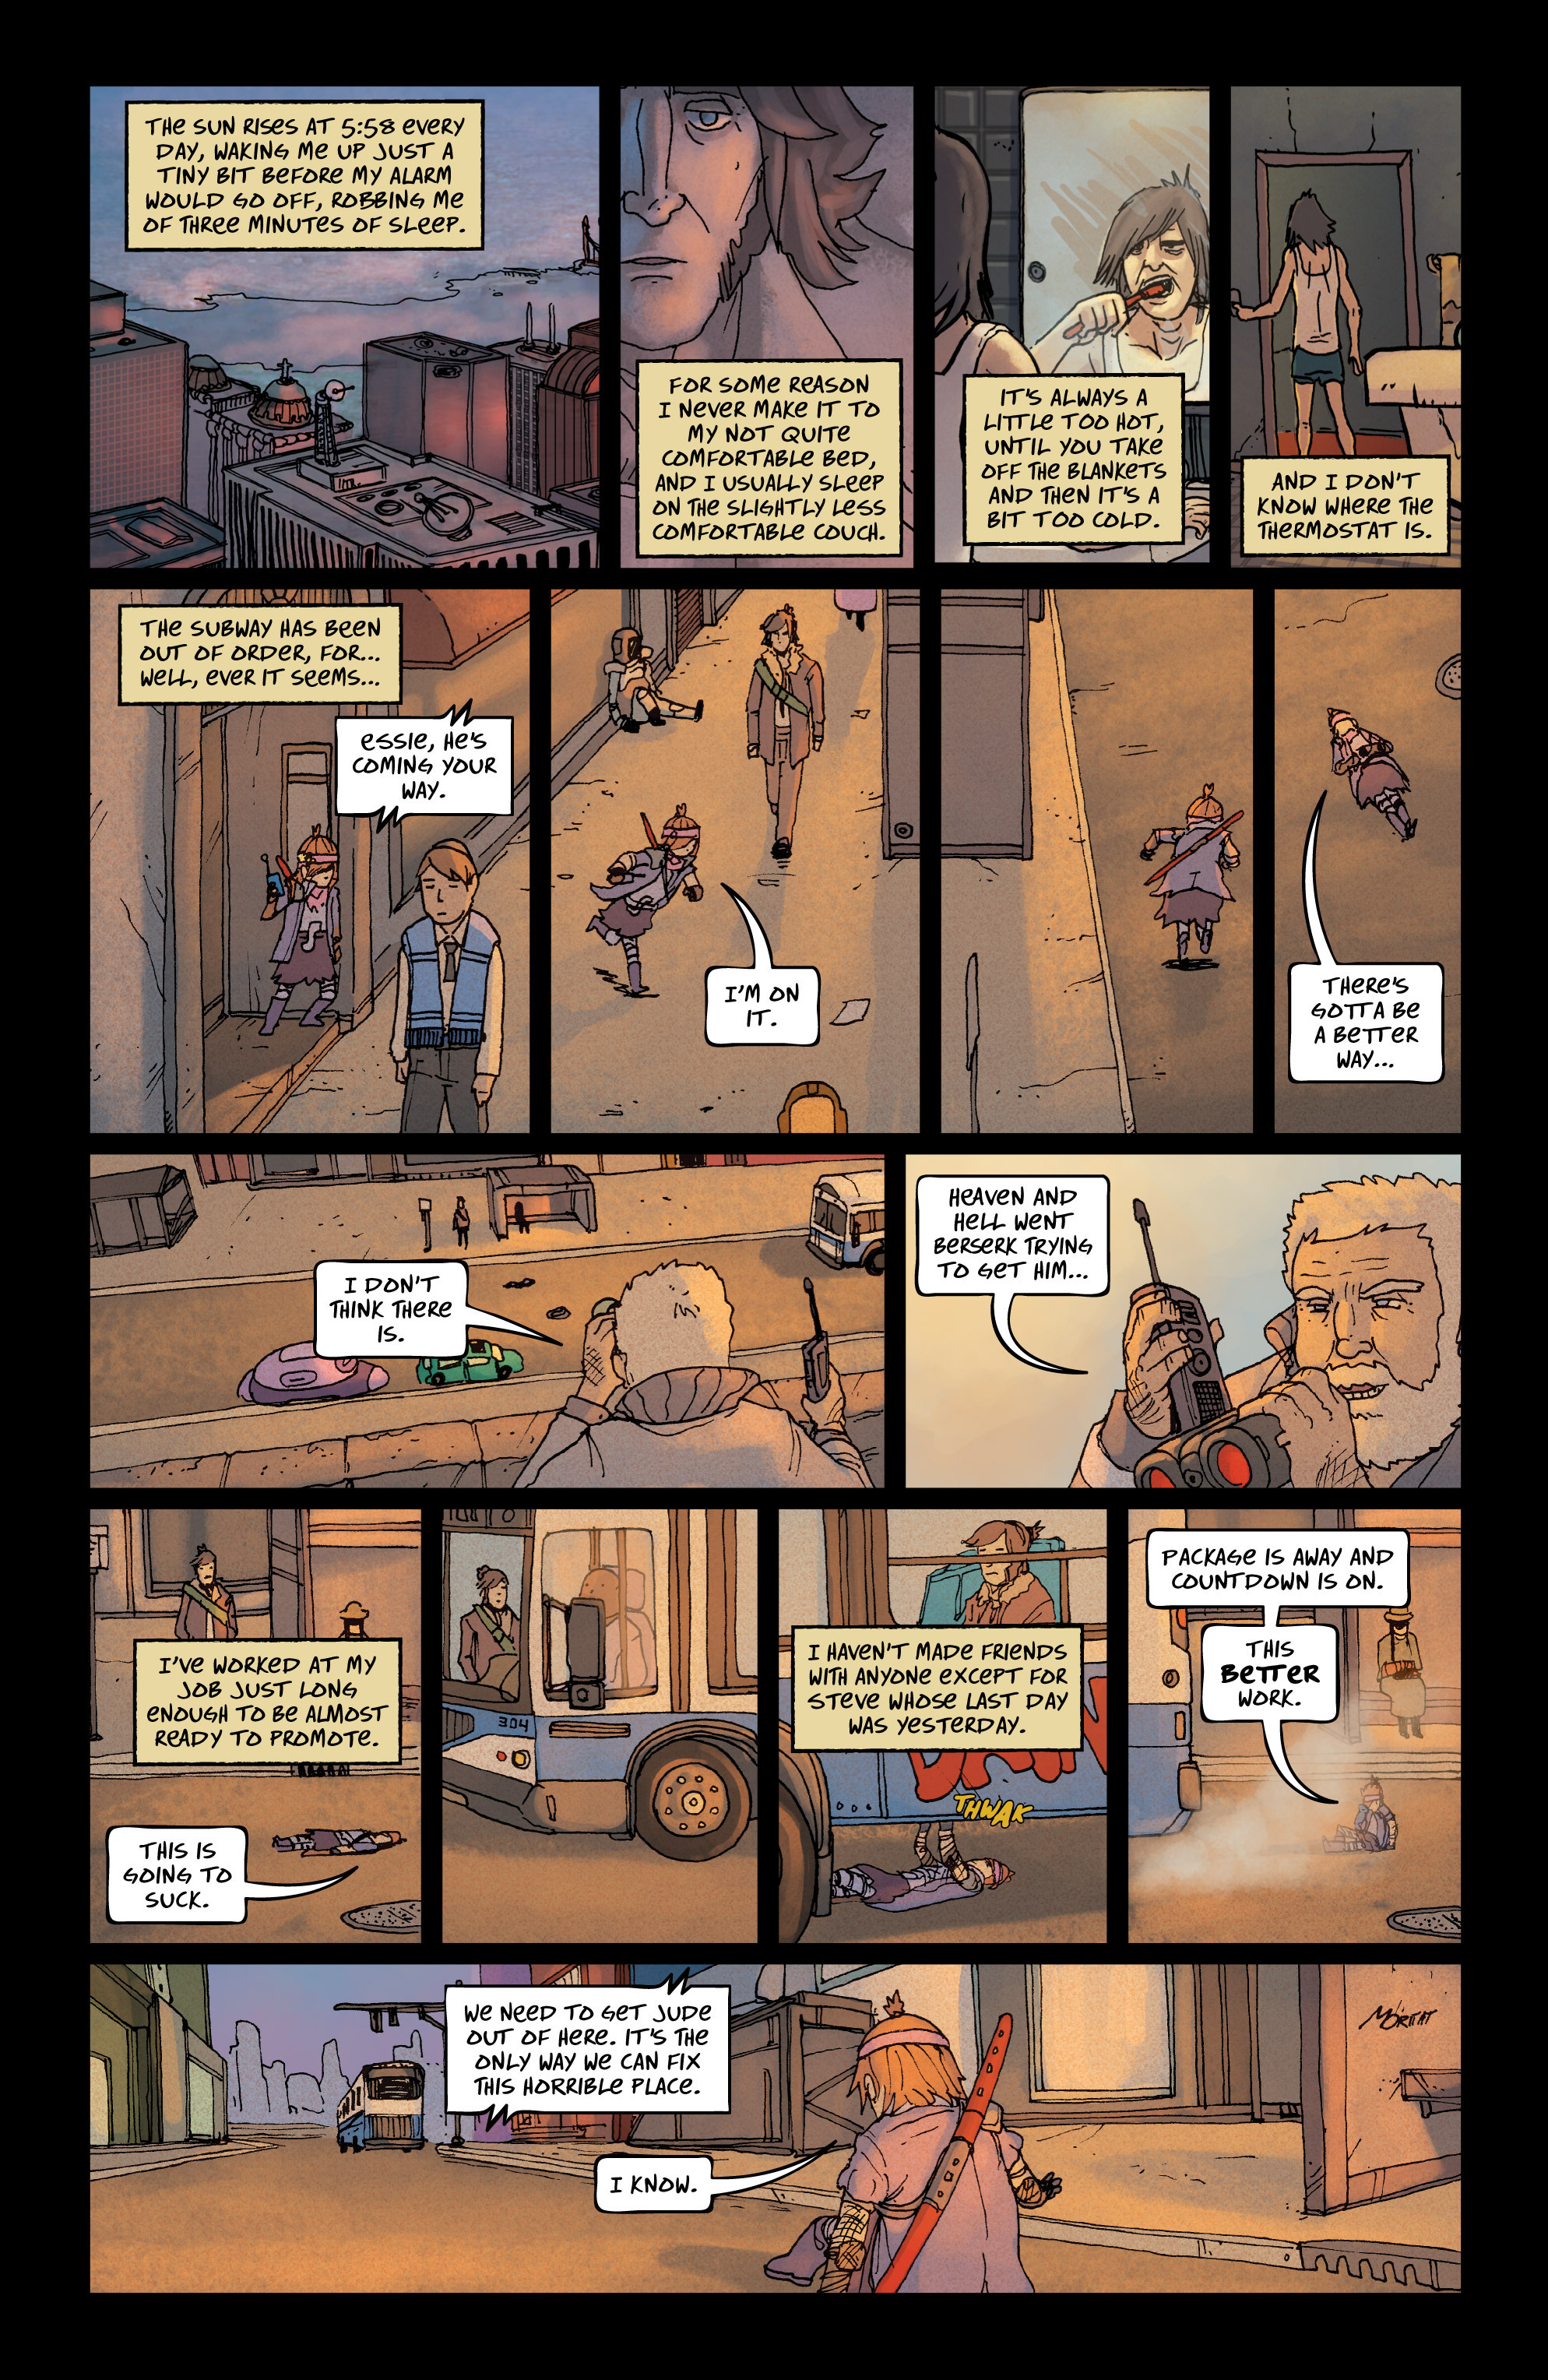 Exodus: The Life After (2015-): Chapter 1 - Page 3